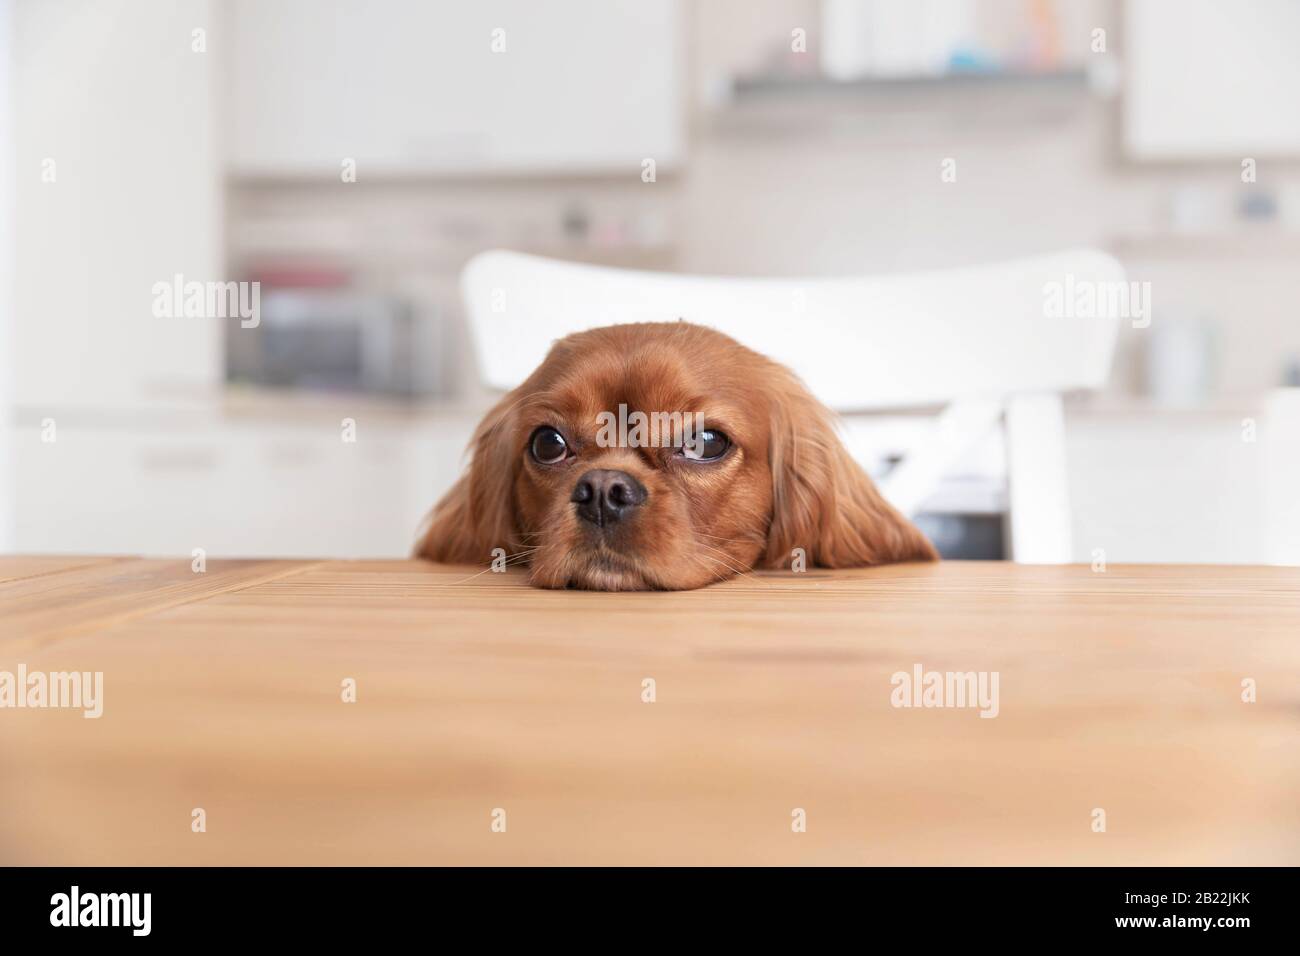 Cute dog sitting behind the kitchen table Stock Photo